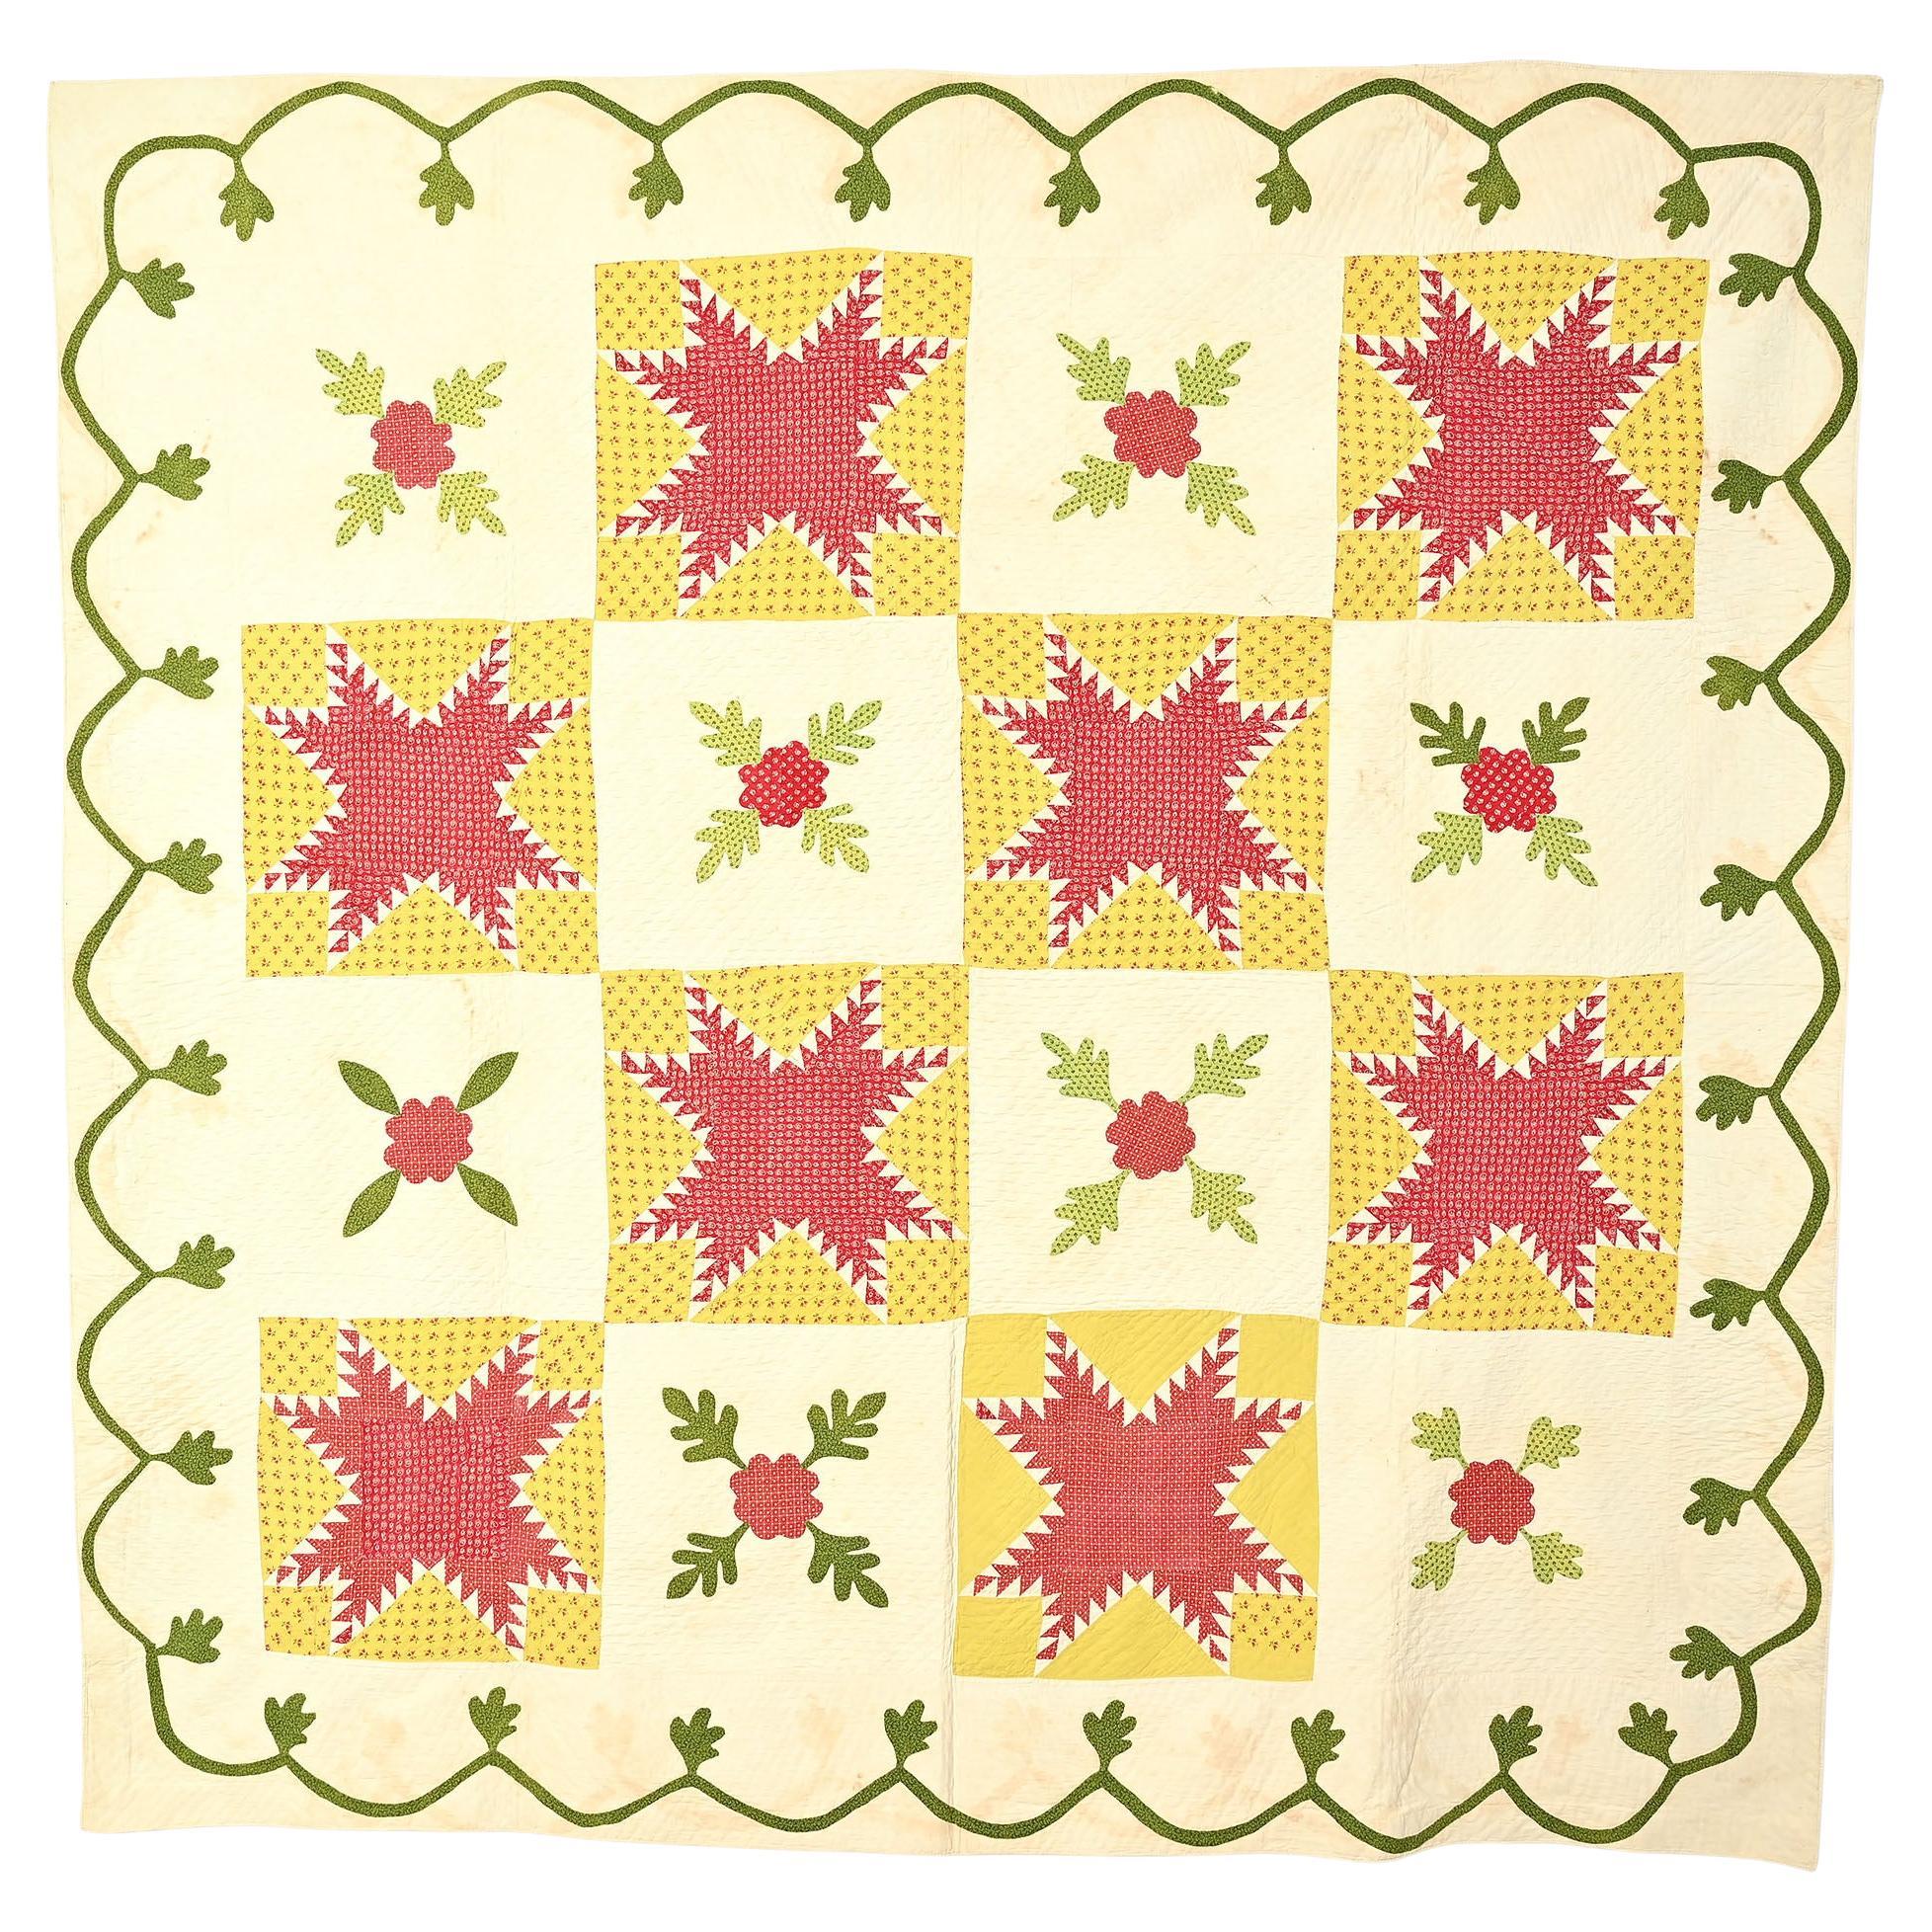 Feathered Stars Quilt For Sale